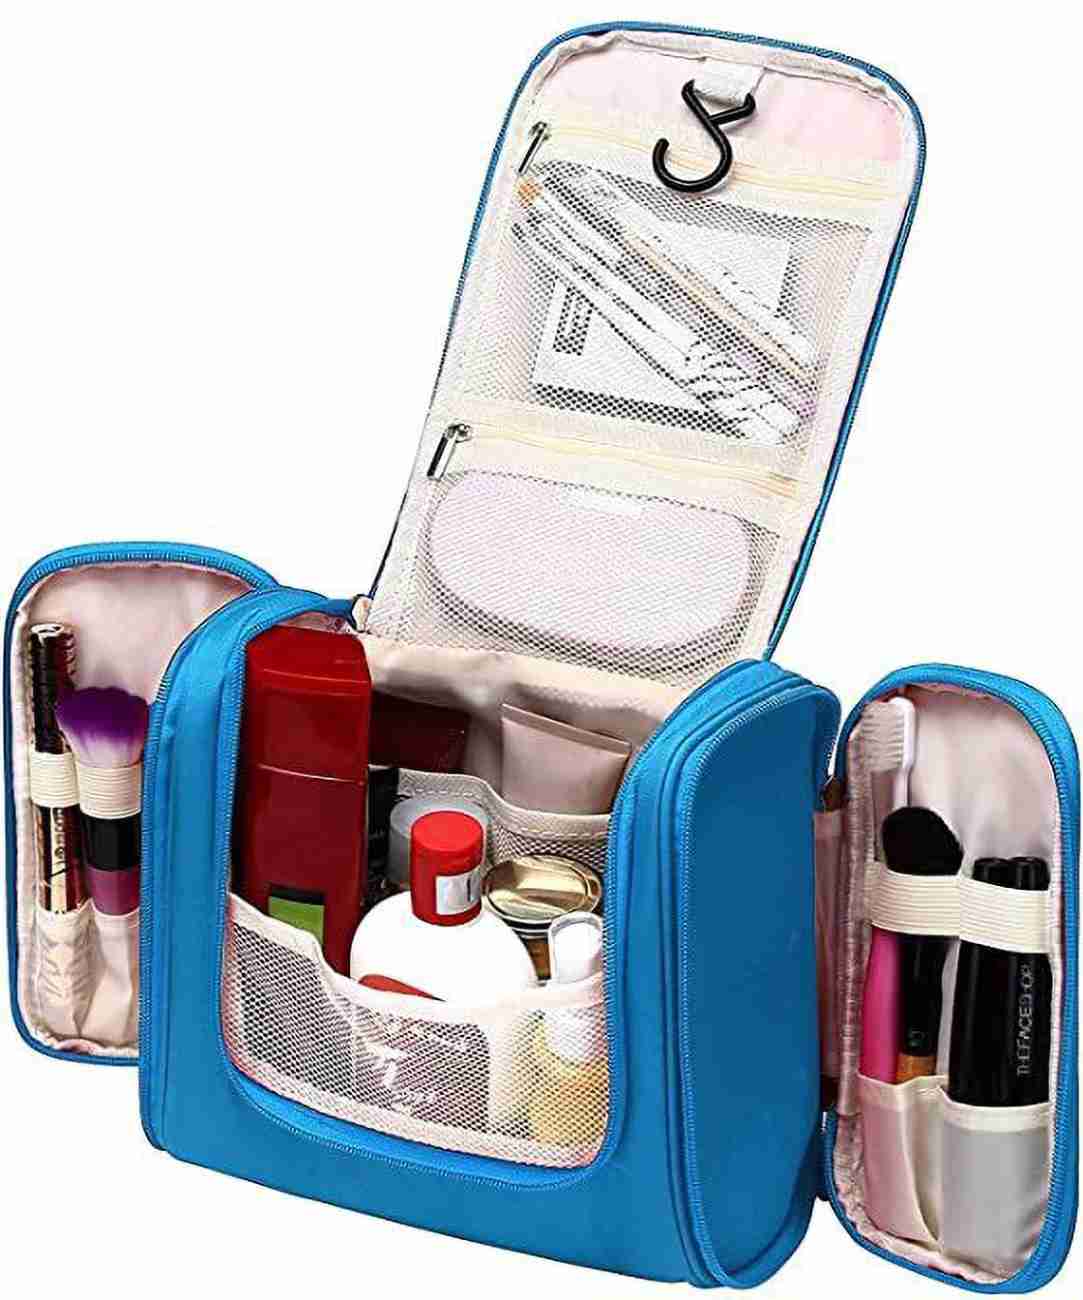 Toiletry bag for Women Makeup pouch Waterproof Shower Wash Bag